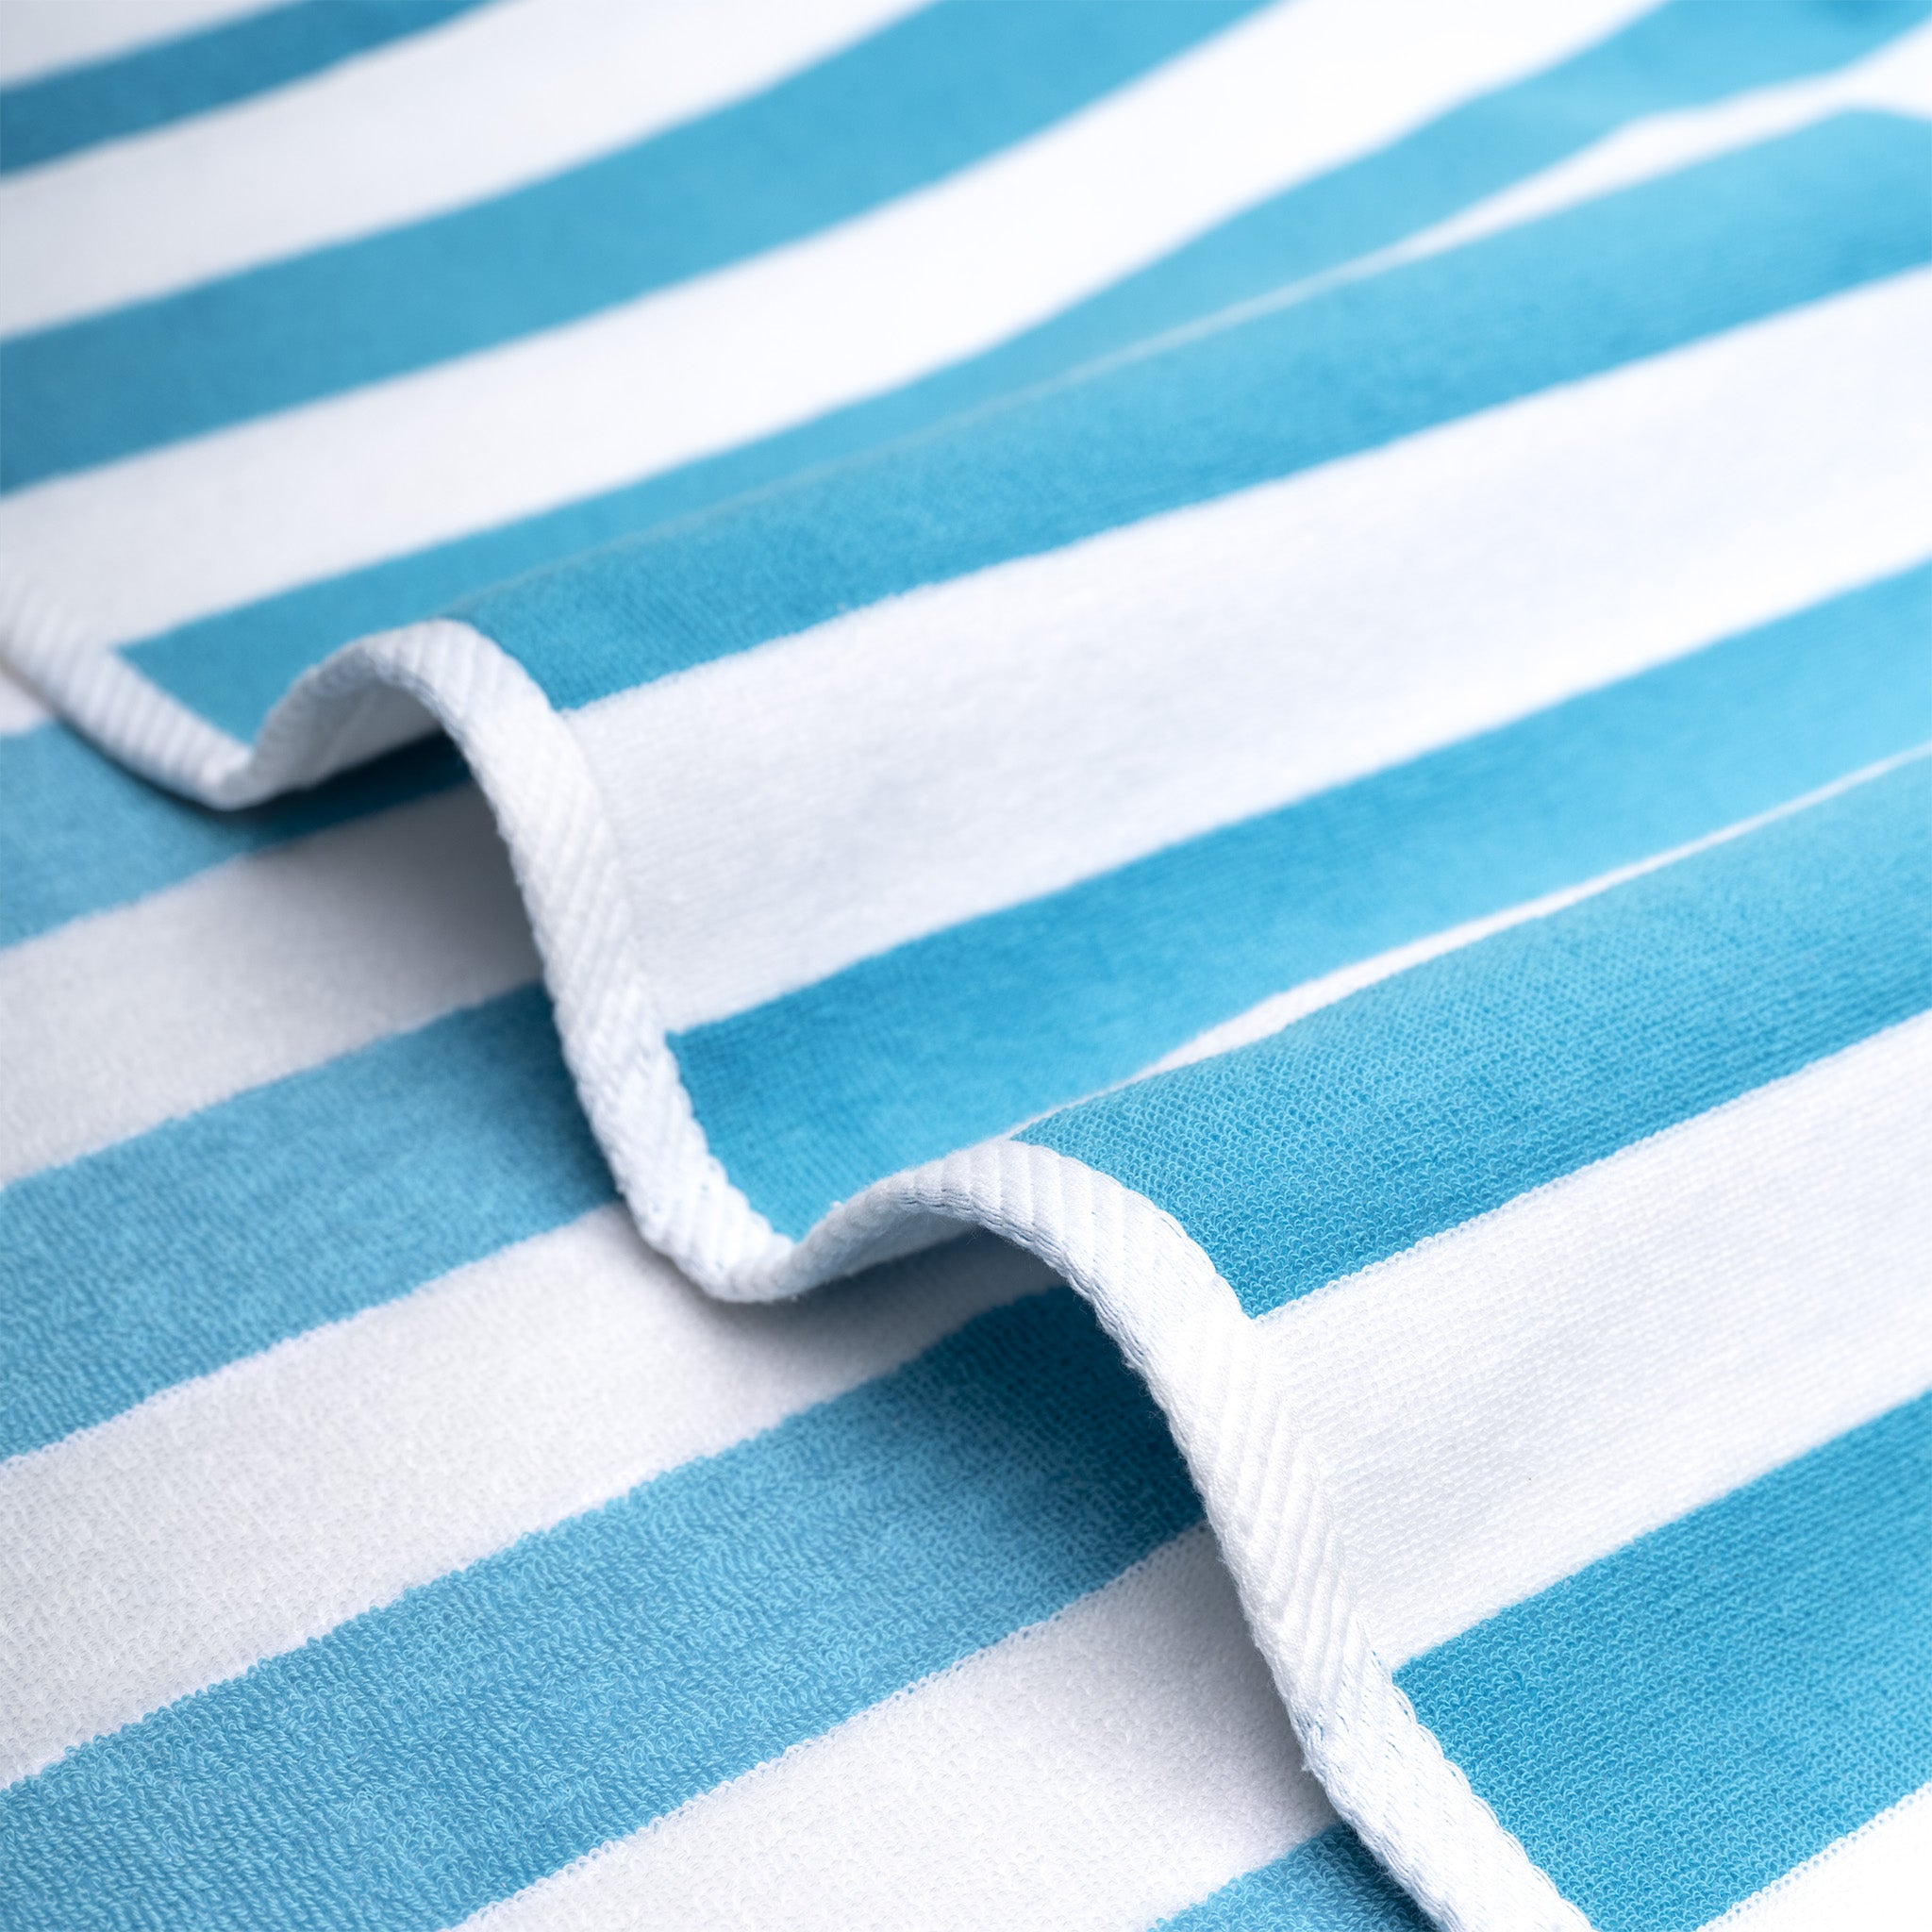 American Soft Linen 100% Cotton 4 Pack Beach Towels Cabana Striped Pool Towels -turquoise-blue-5